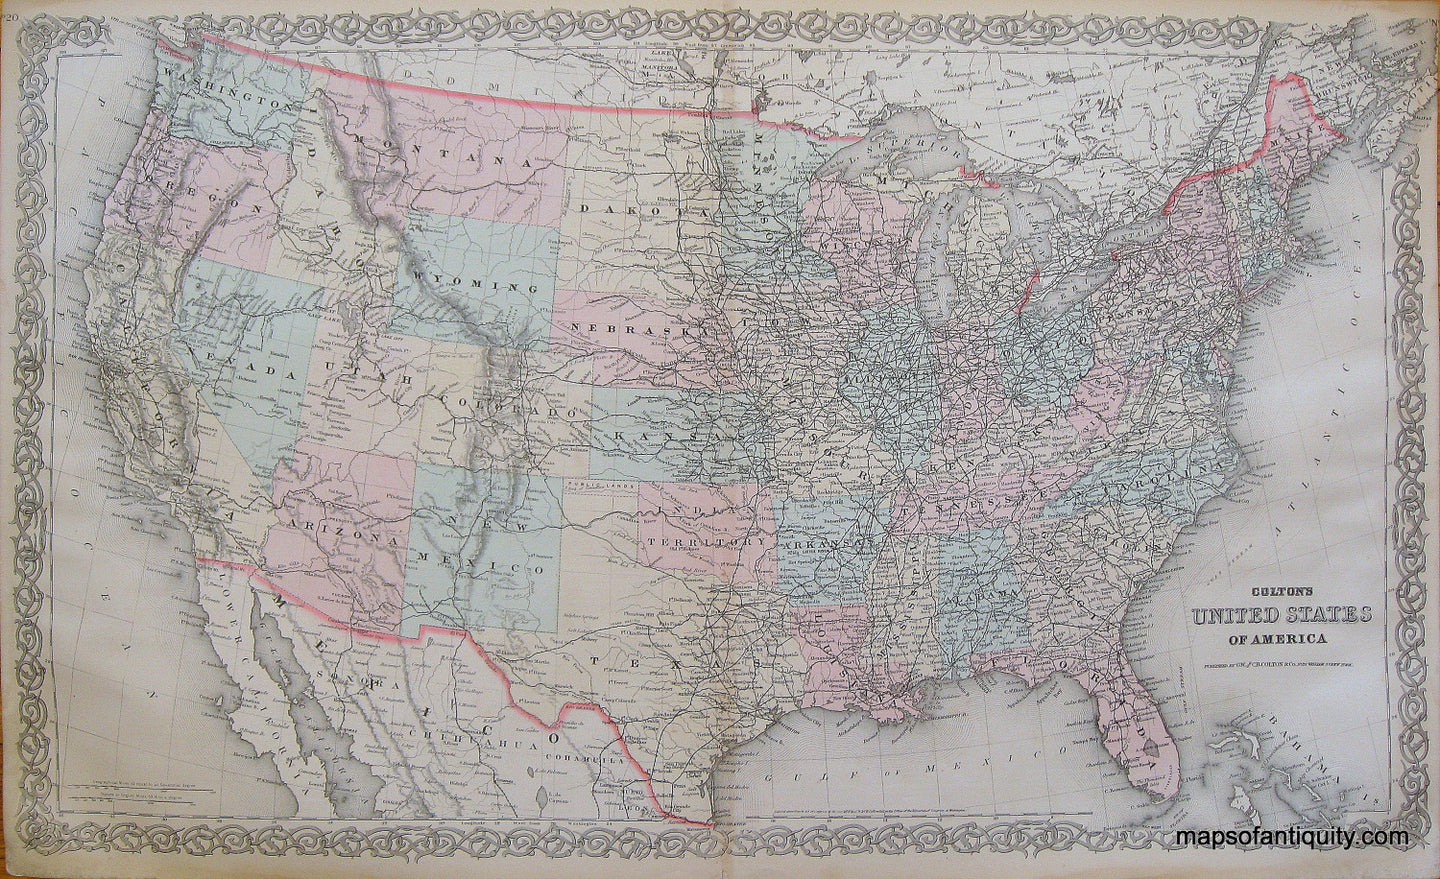 Antique-Hand-Colored-Map-Colton's-United-States-of-America-******-United-States-General--1887-Colton-Maps-Of-Antiquity